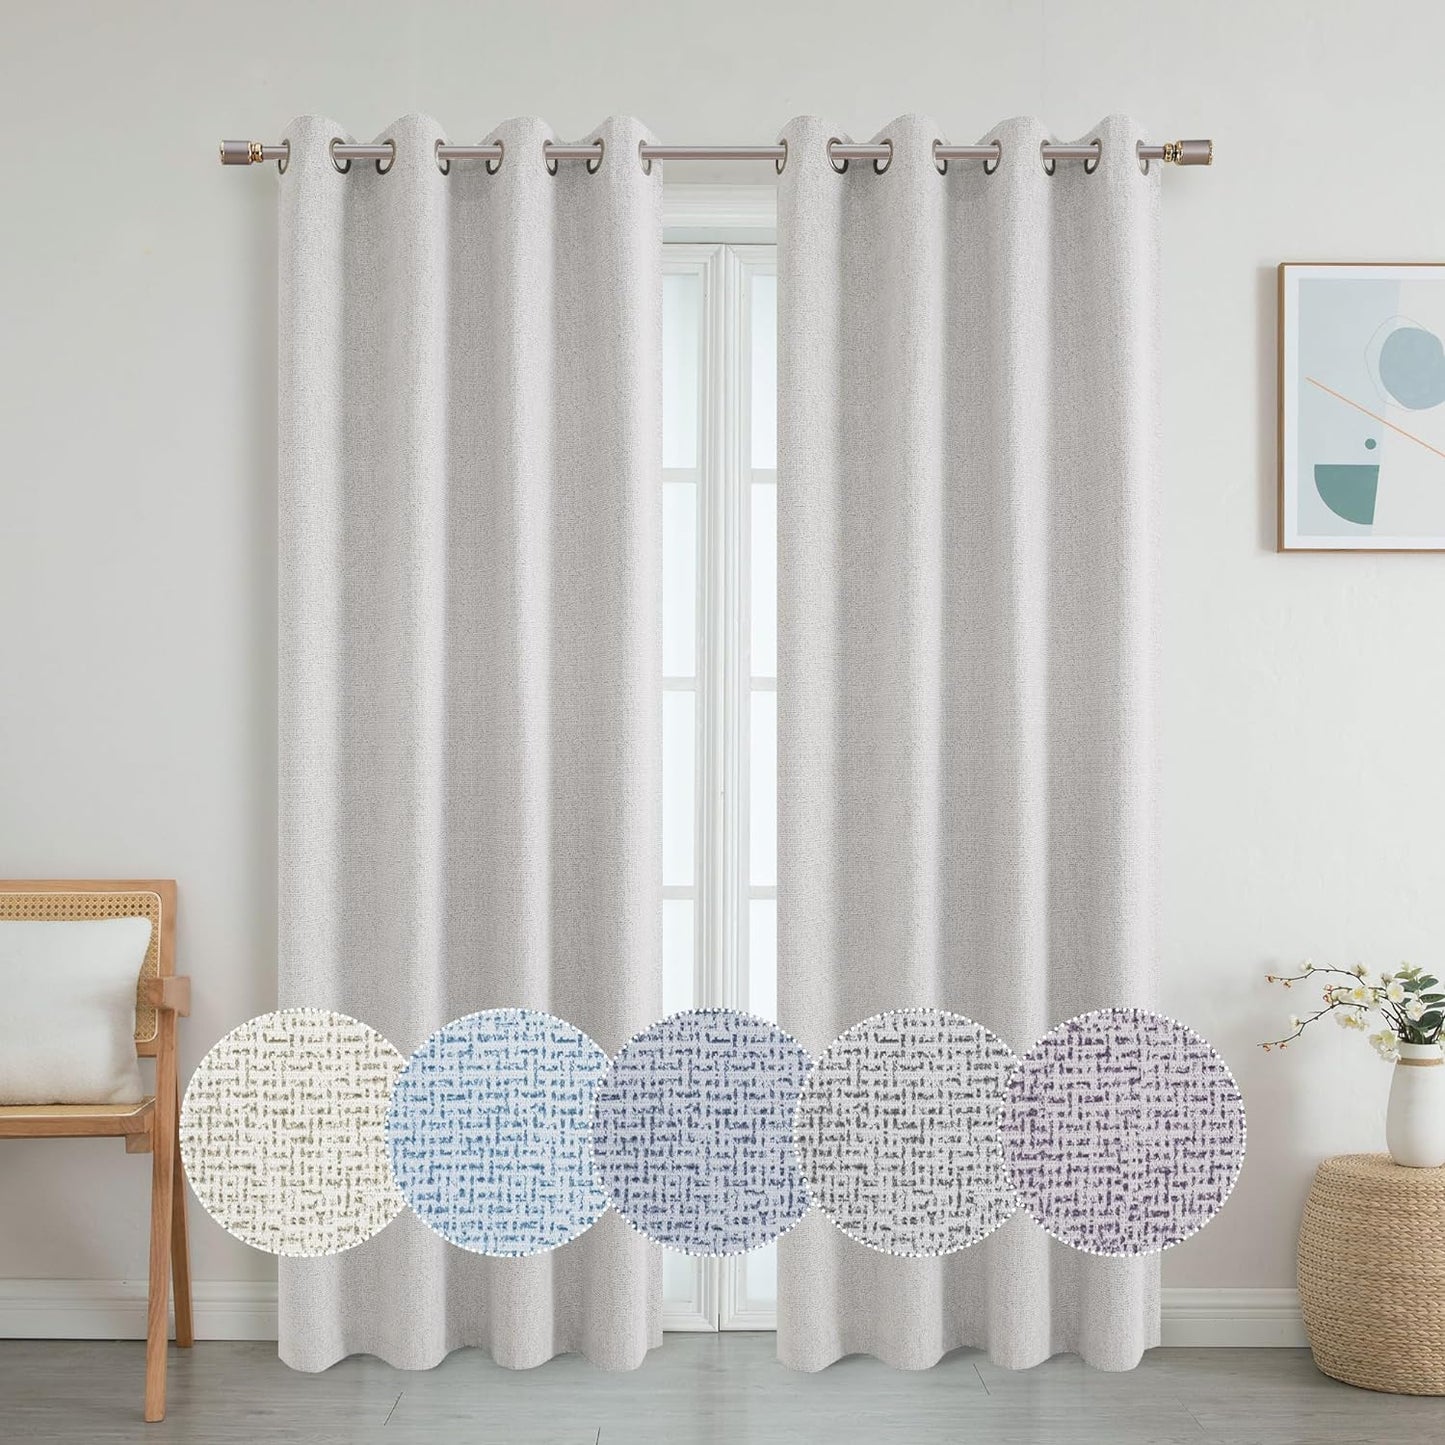 OWENIE Luke Black Out Curtains 63 Inch Long 2 Panels for Bedroom, Geometric Printed Completely Blackout Room Darkening Curtains, Grommet Thermal Insulated Living Room Curtain, 2 PCS, Each 42Wx63L Inch  OWENIE Taupe 42"W X 84"L | 2 Pcs 